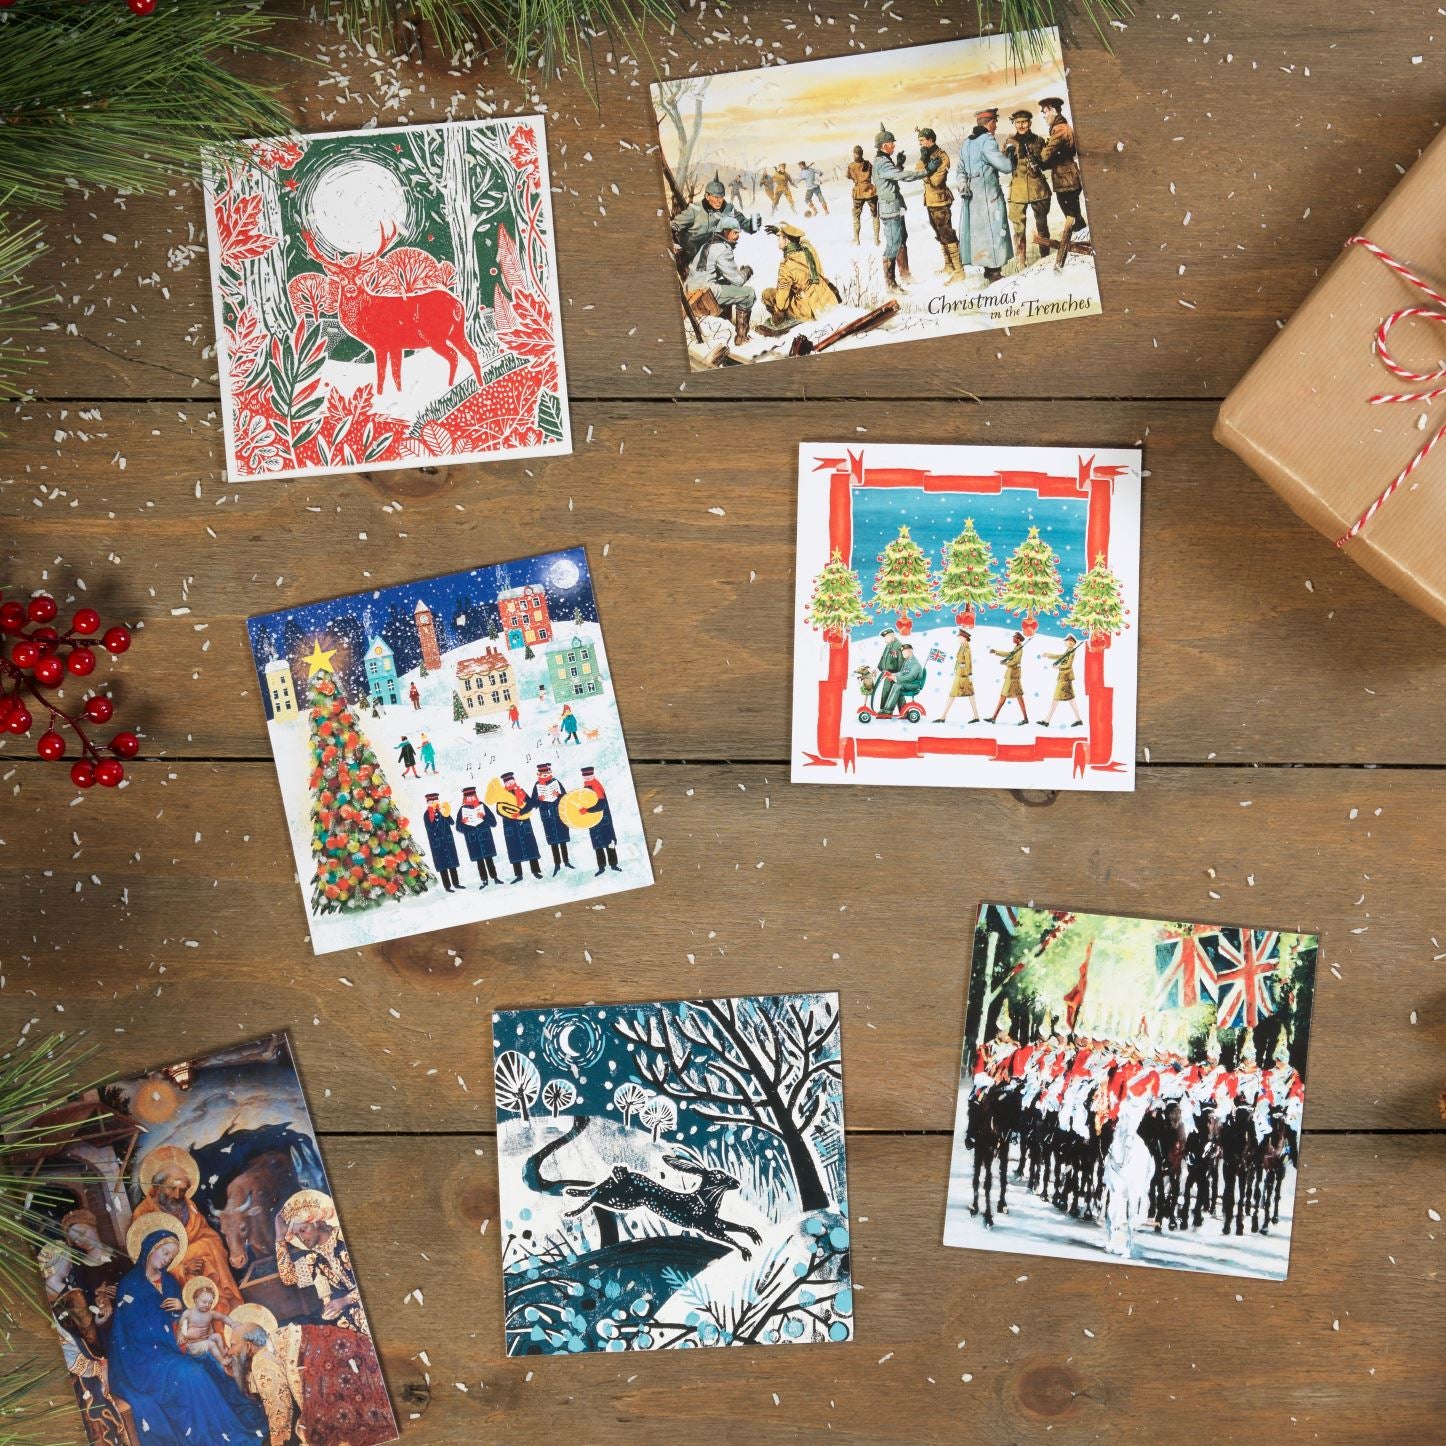 January Sale - Up to 80% off selected Christmas cards and decorations